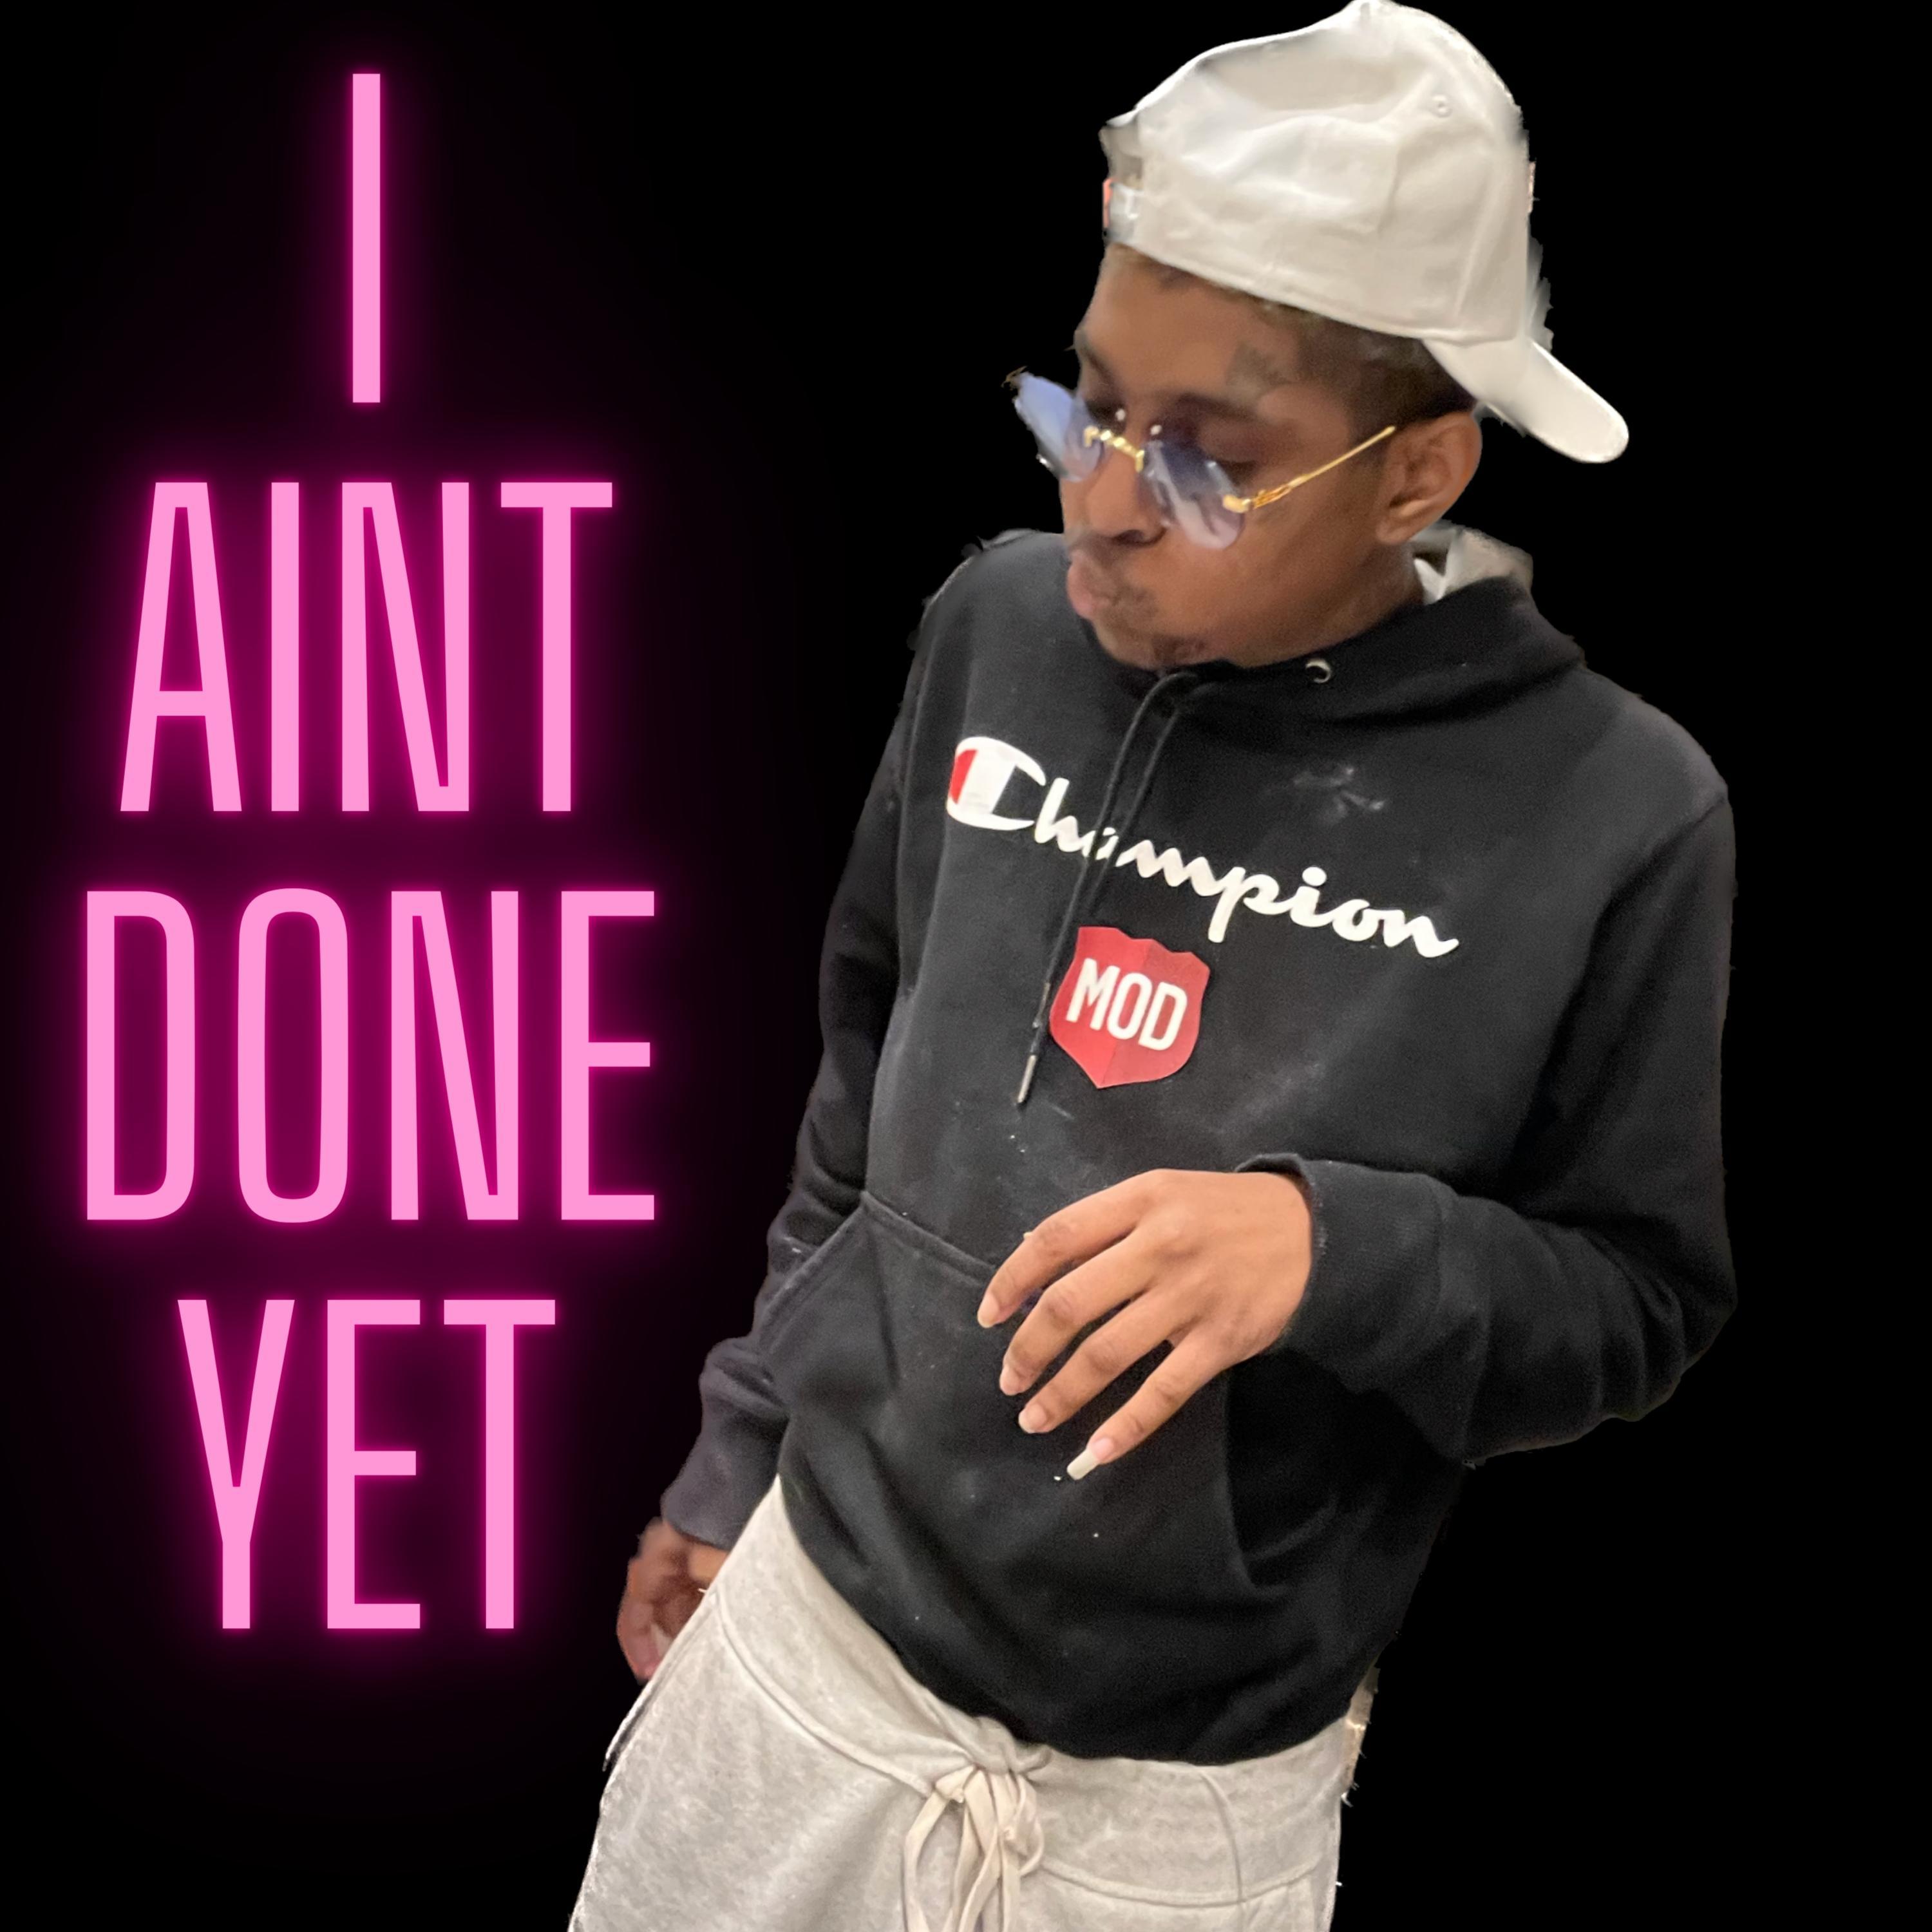 Elguala - I Aint Done Yet